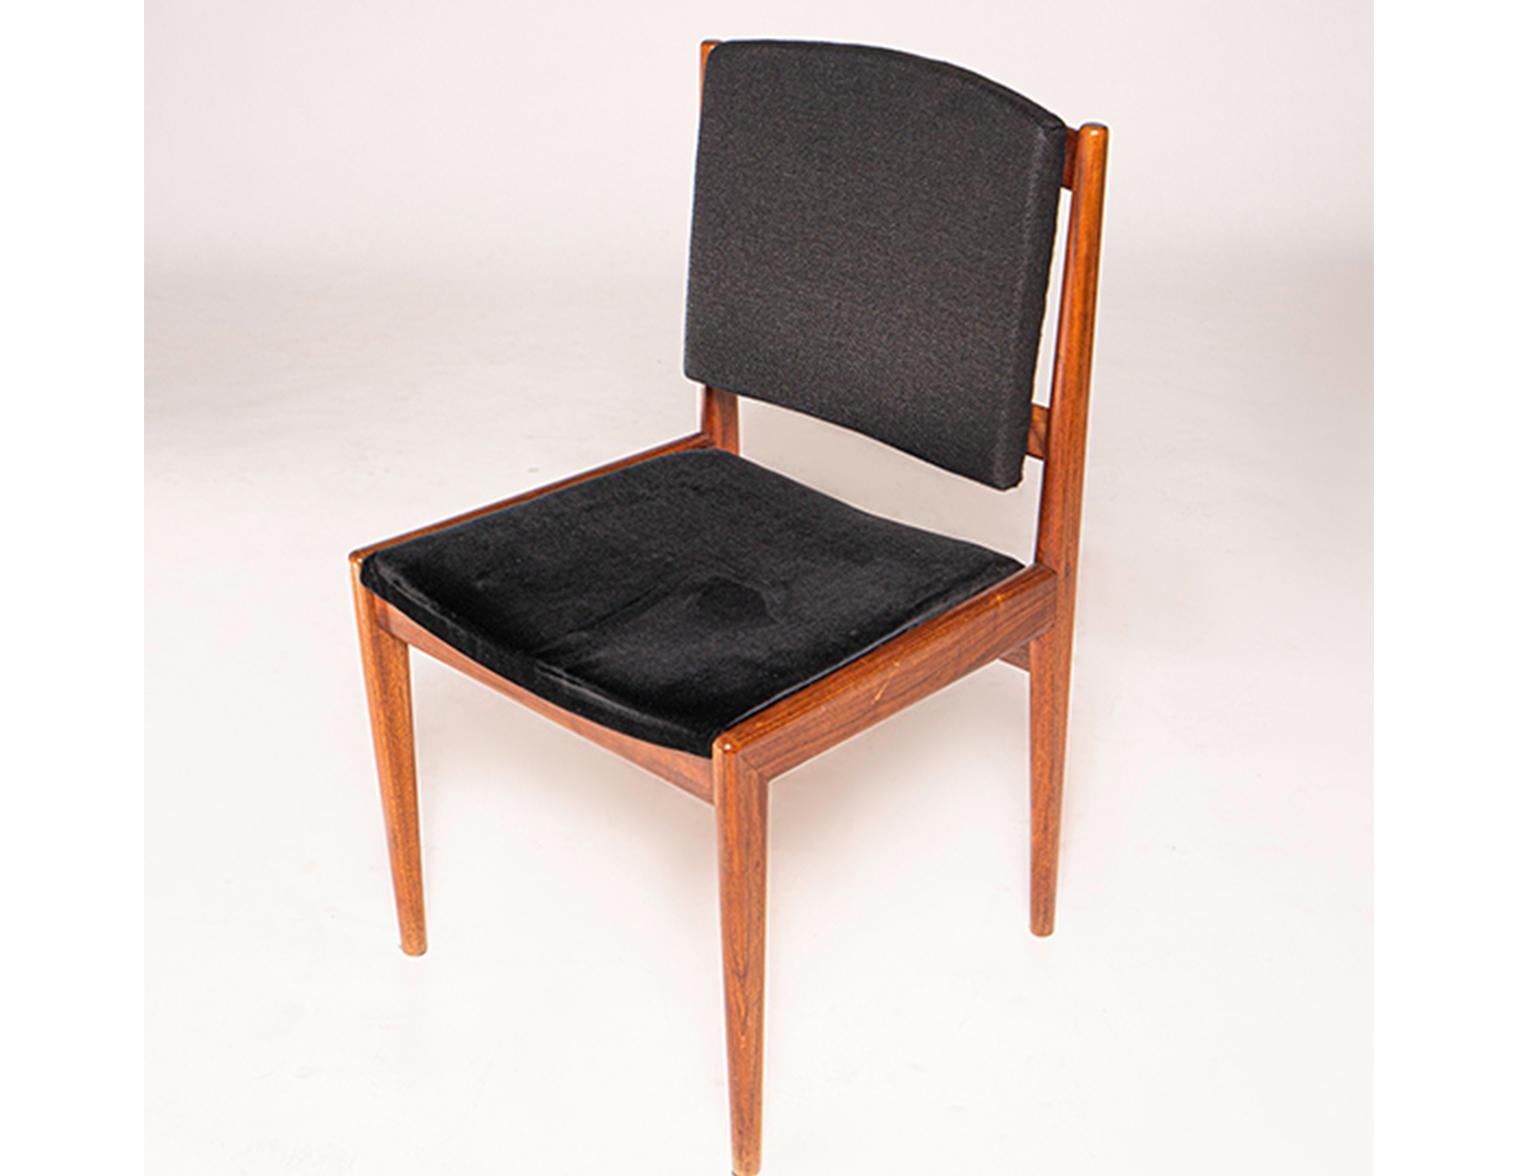 Mid-Century Modern Swedish Classic Chairs from the 60s Remodeled in the Intersection of Fashion For Sale